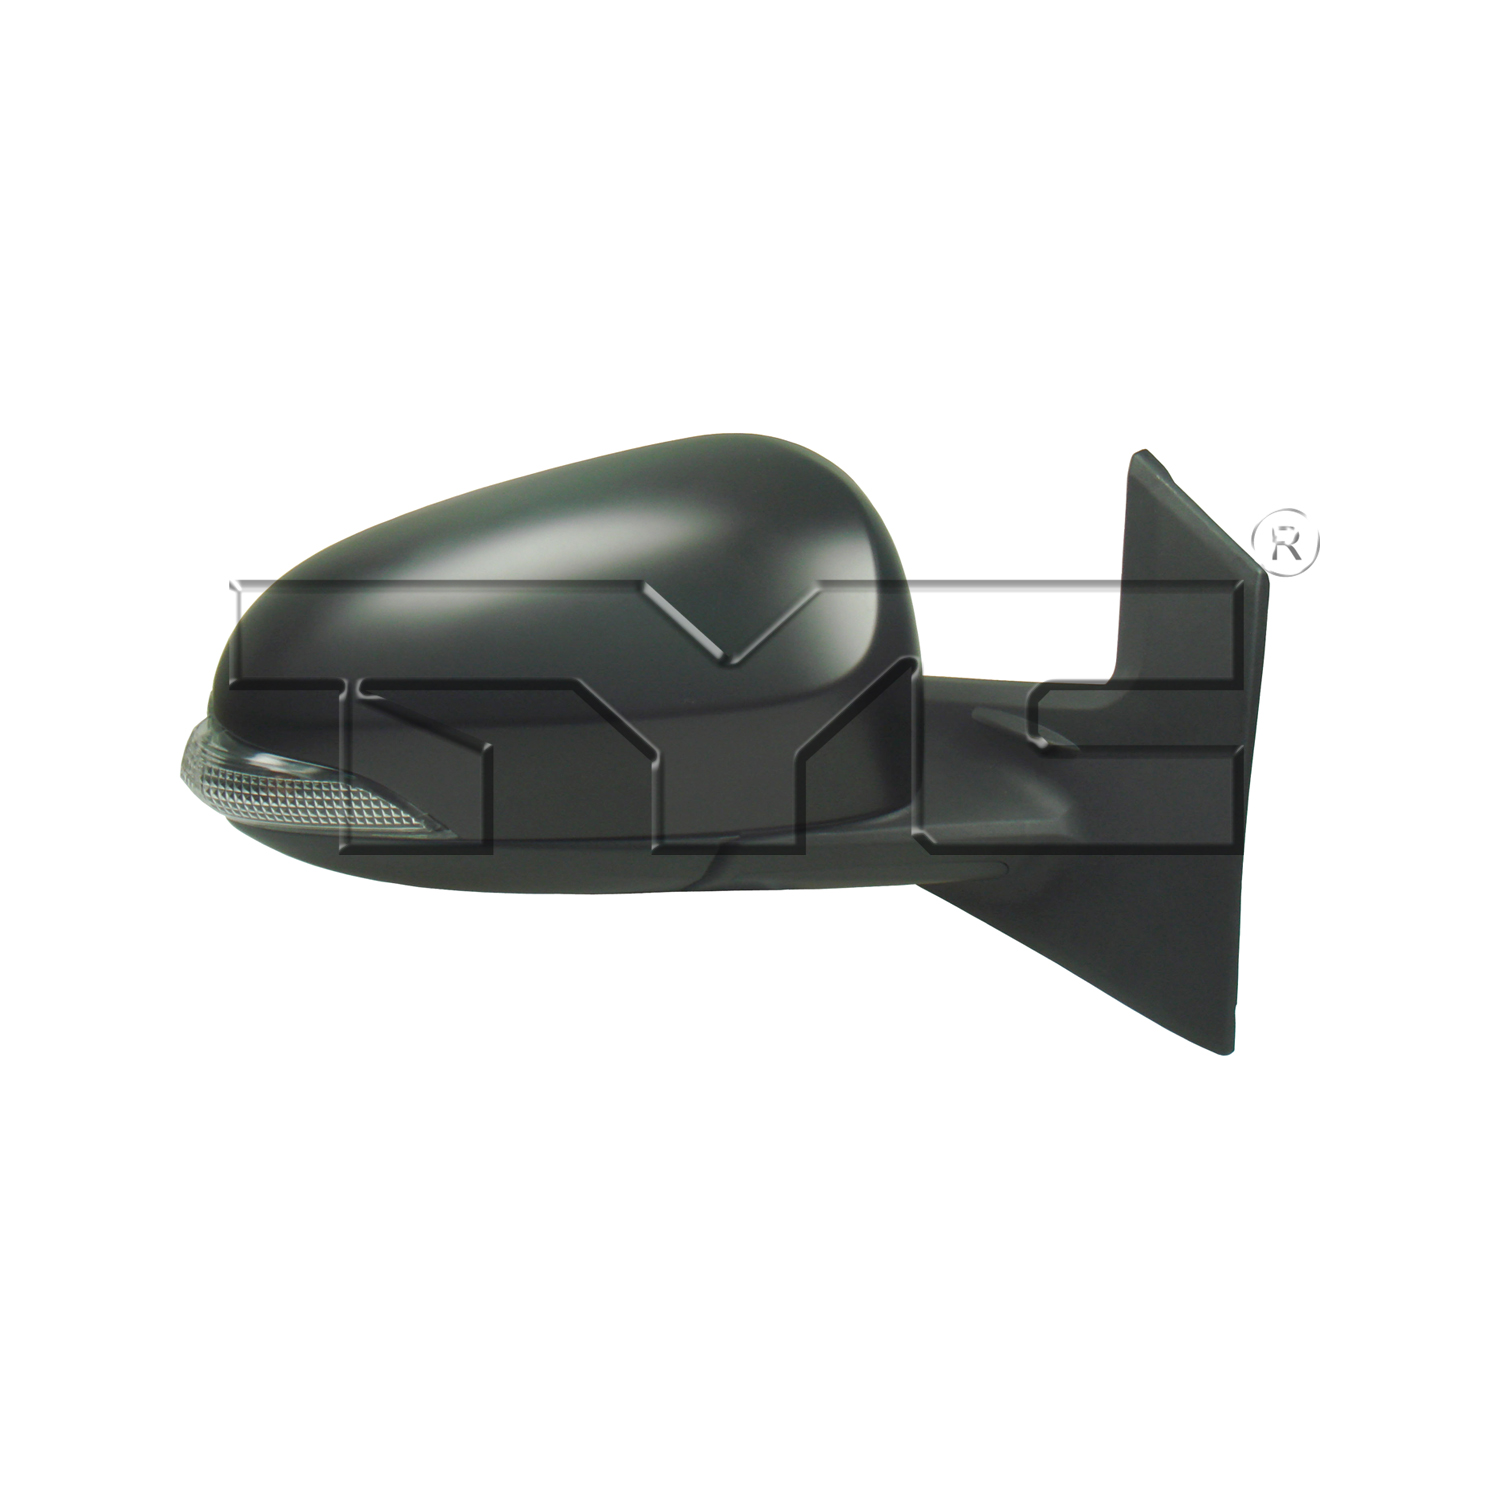 Aftermarket MIRRORS for TOYOTA - PRIUS C, PRIUS c,12-19,RT Mirror outside rear view